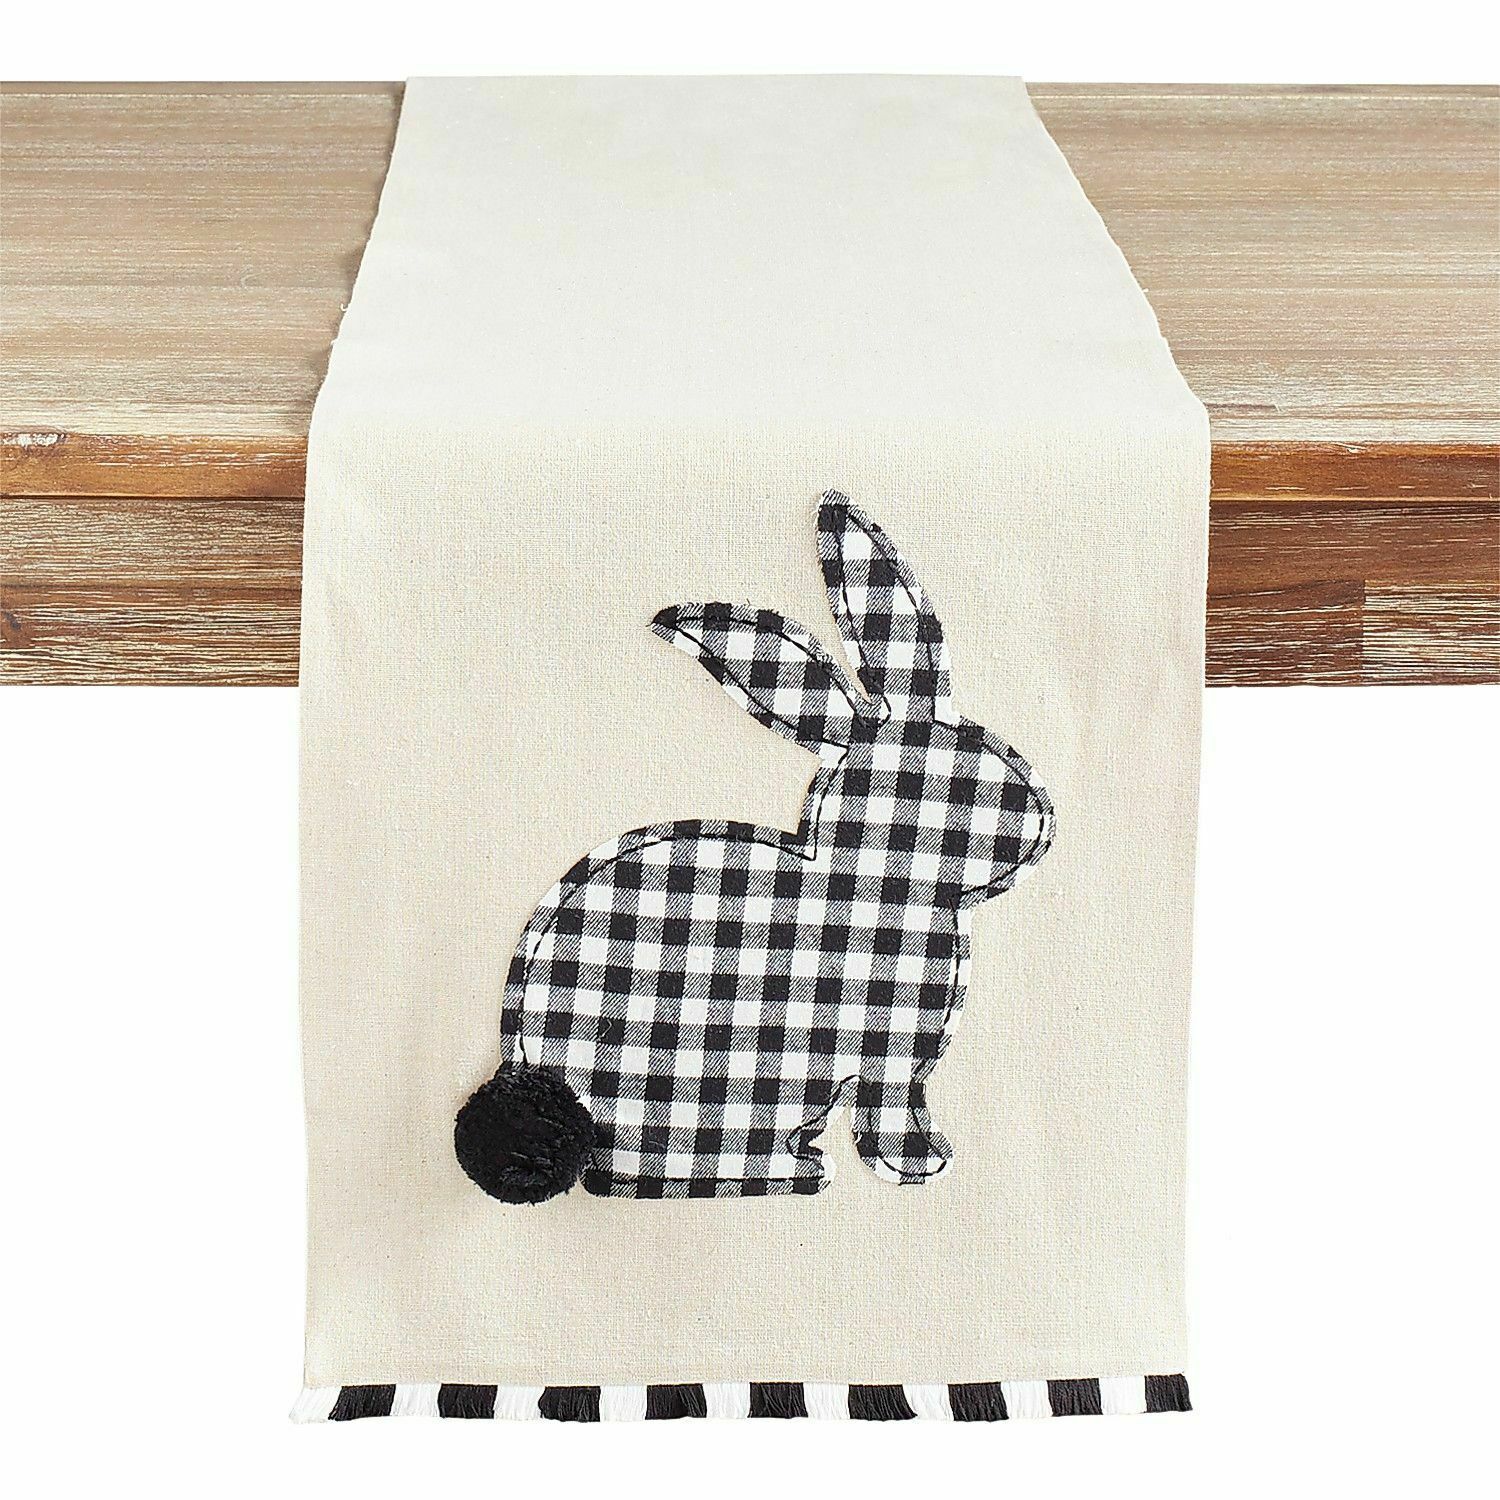 NWT Pier 1 Imports GINGHAM PLAID  Easter RABBIT Table Runner 13 x 72 - $39.59